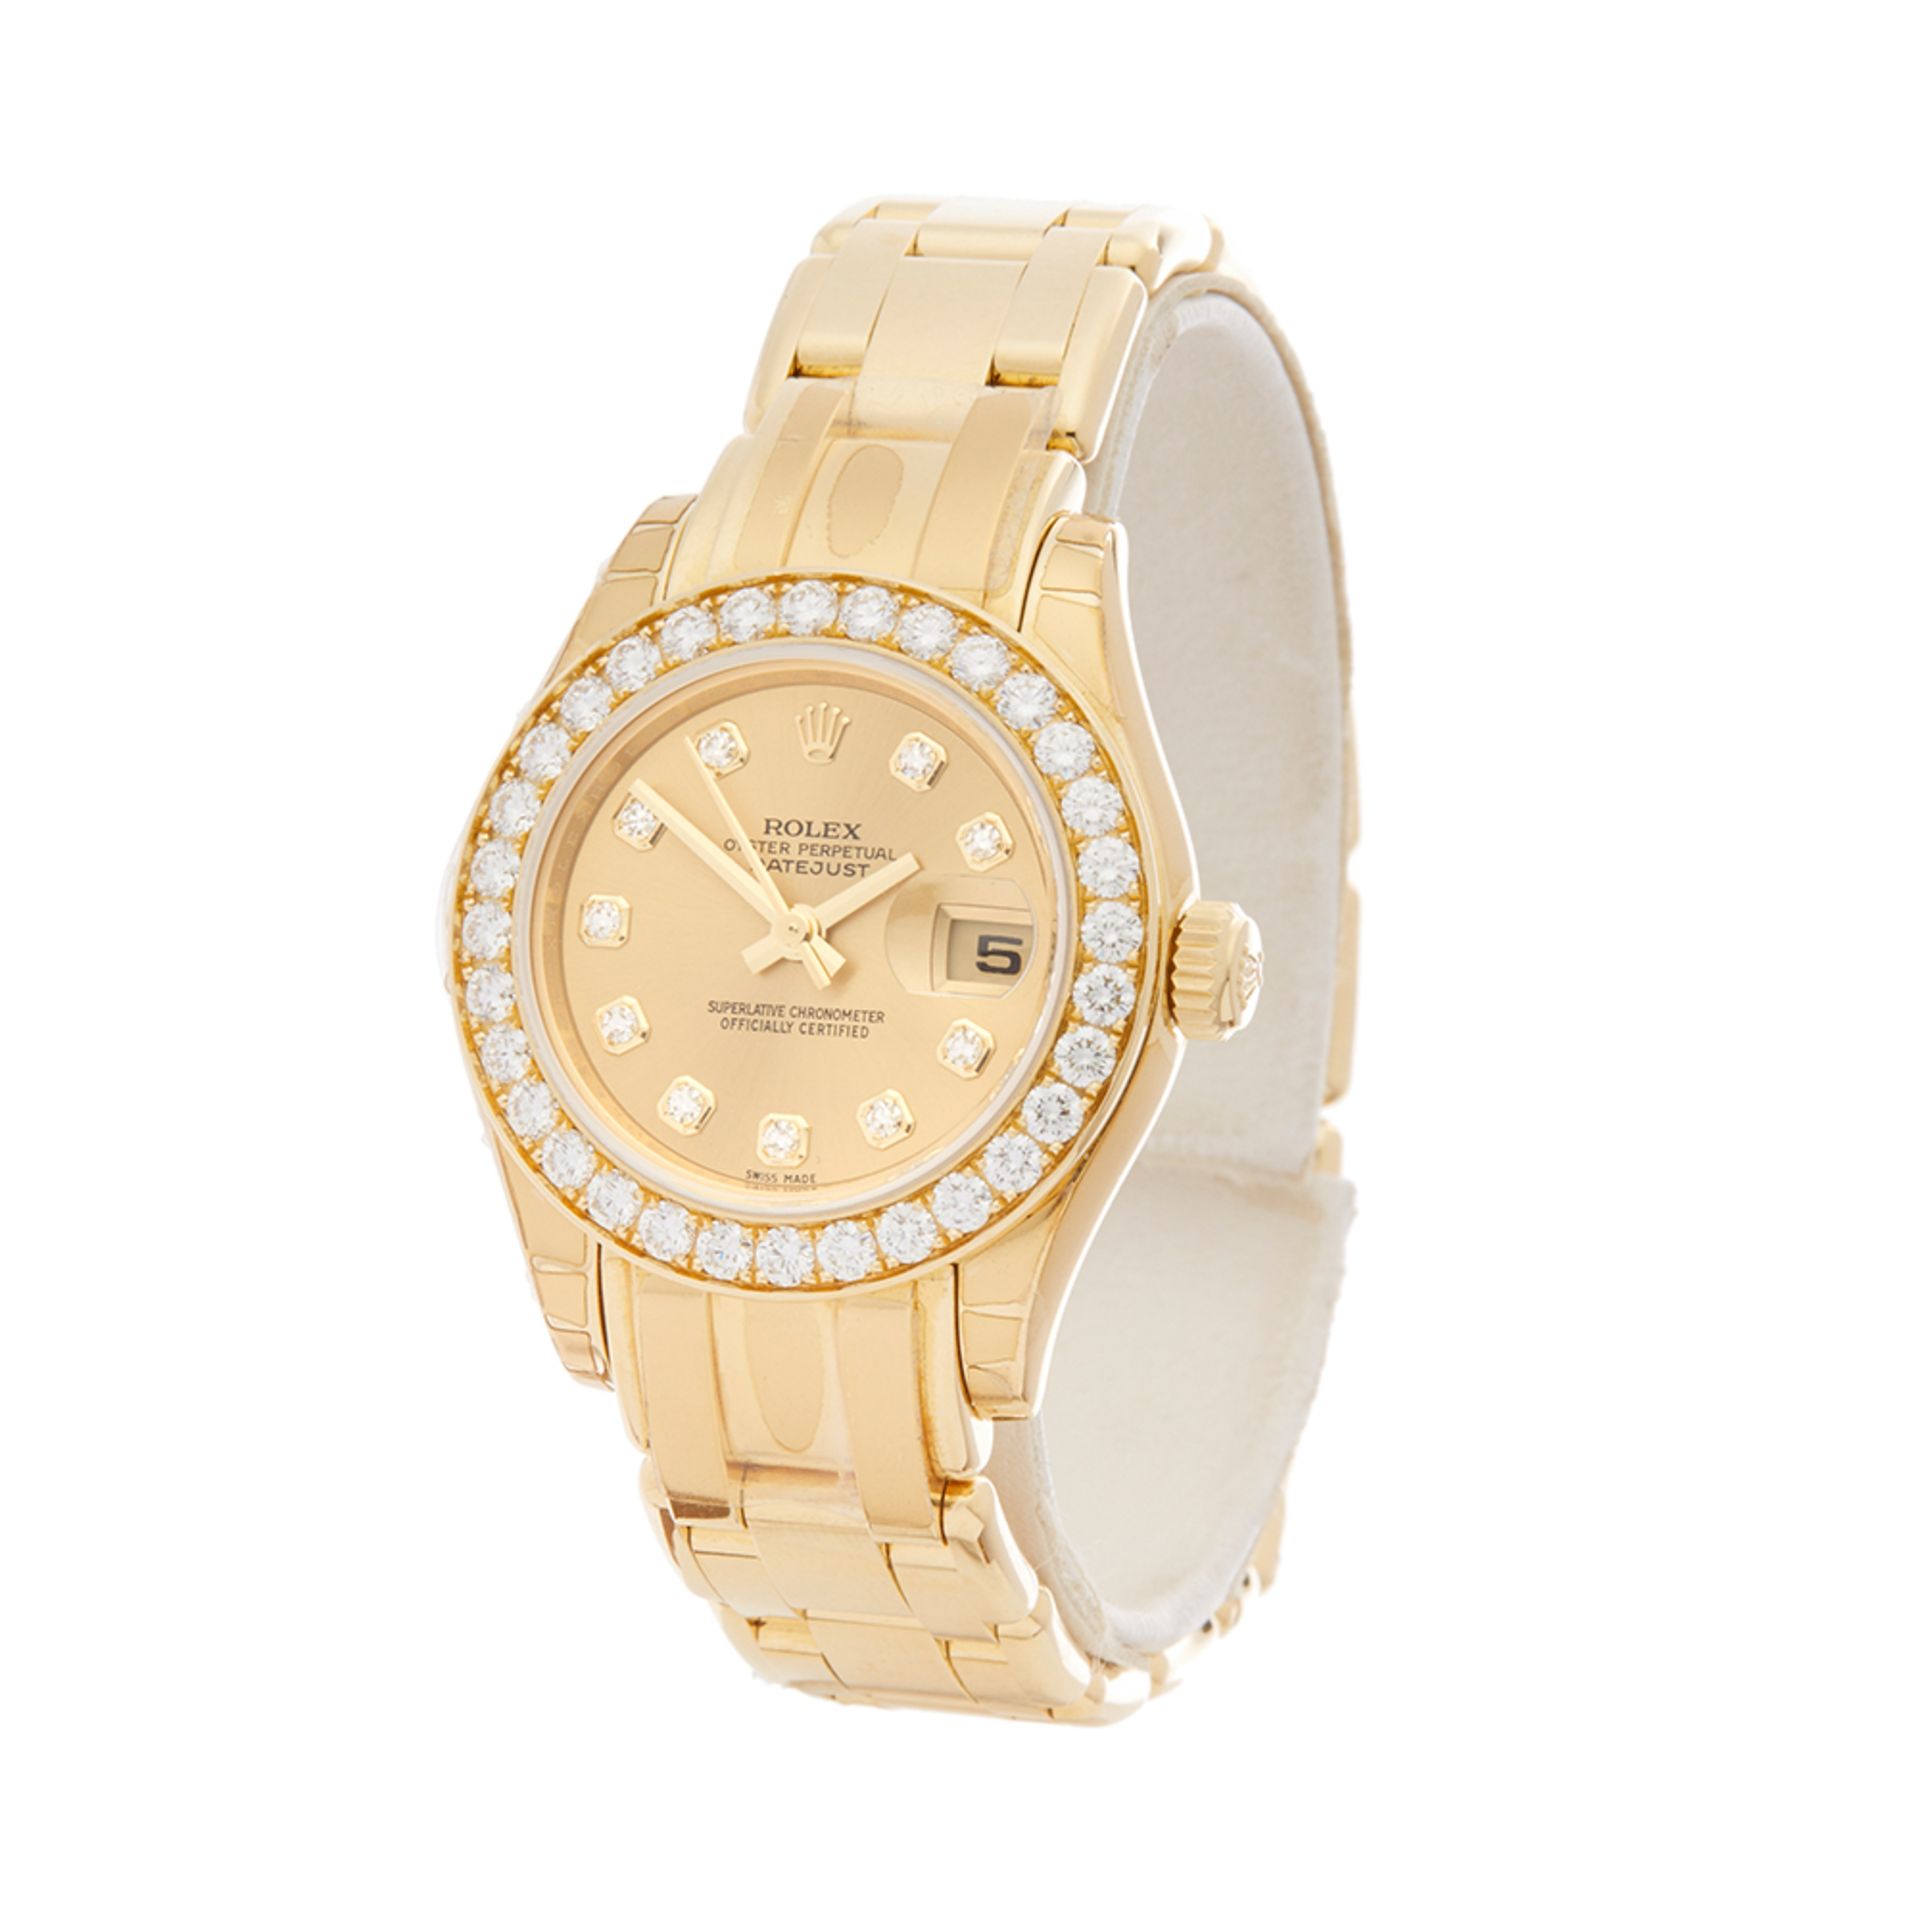 Rolex Pearlmaster 29mm 18k Yellow Gold - 80298 - Image 3 of 7